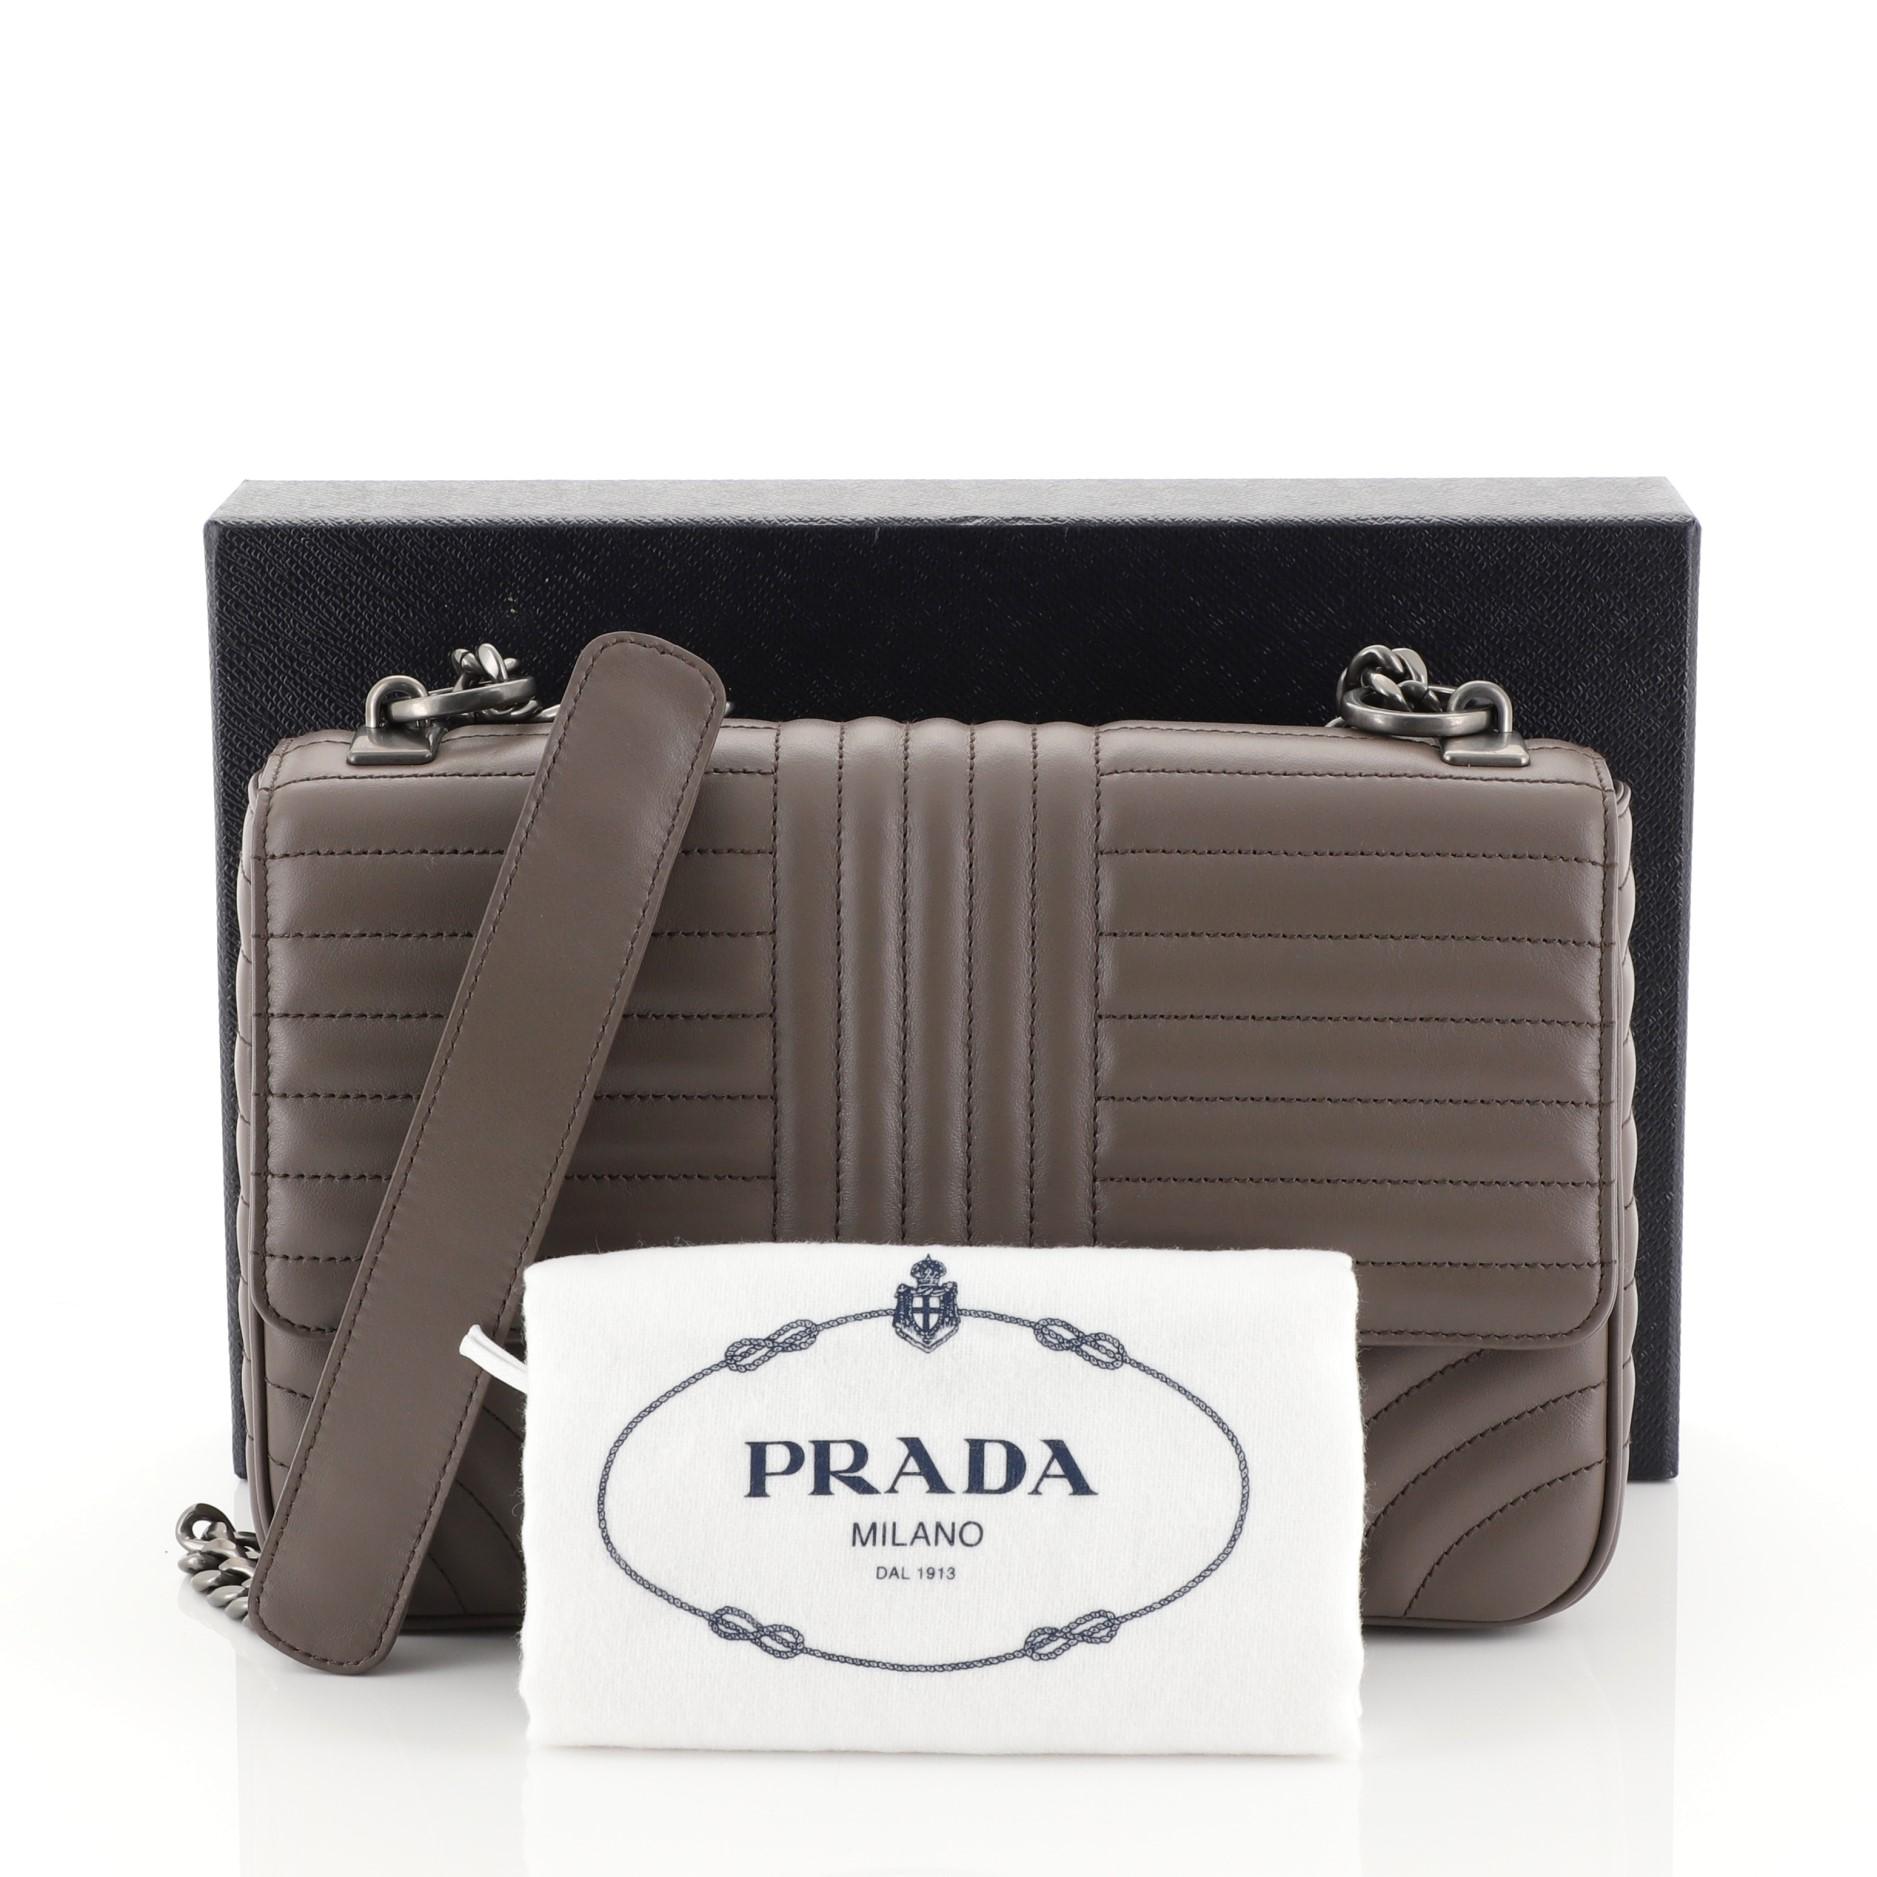 This Prada Chain Flap Shoulder Bag Diagramme Quilted Leather Medium, crafted in neutral diagramme quilted leather, features a sliding chain and leather shoulder strap, flap top with logo lettering and aged silver-tone hardware. Its snap closure